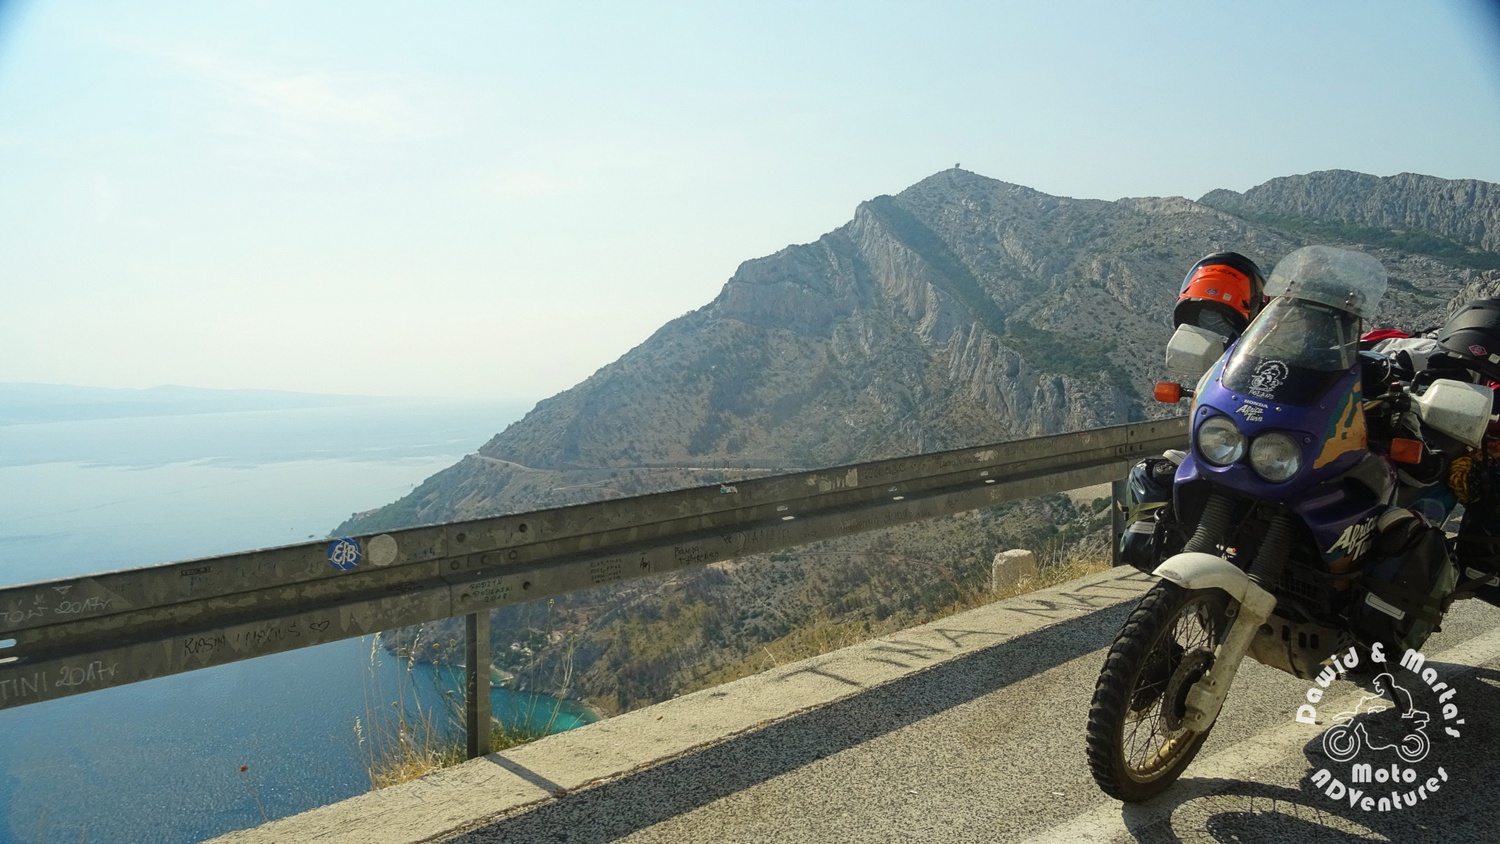 Lookout point at Cesta Domovinskog Rata in Croatia in Biokovo Nature Park with Africa Twin in the foreground